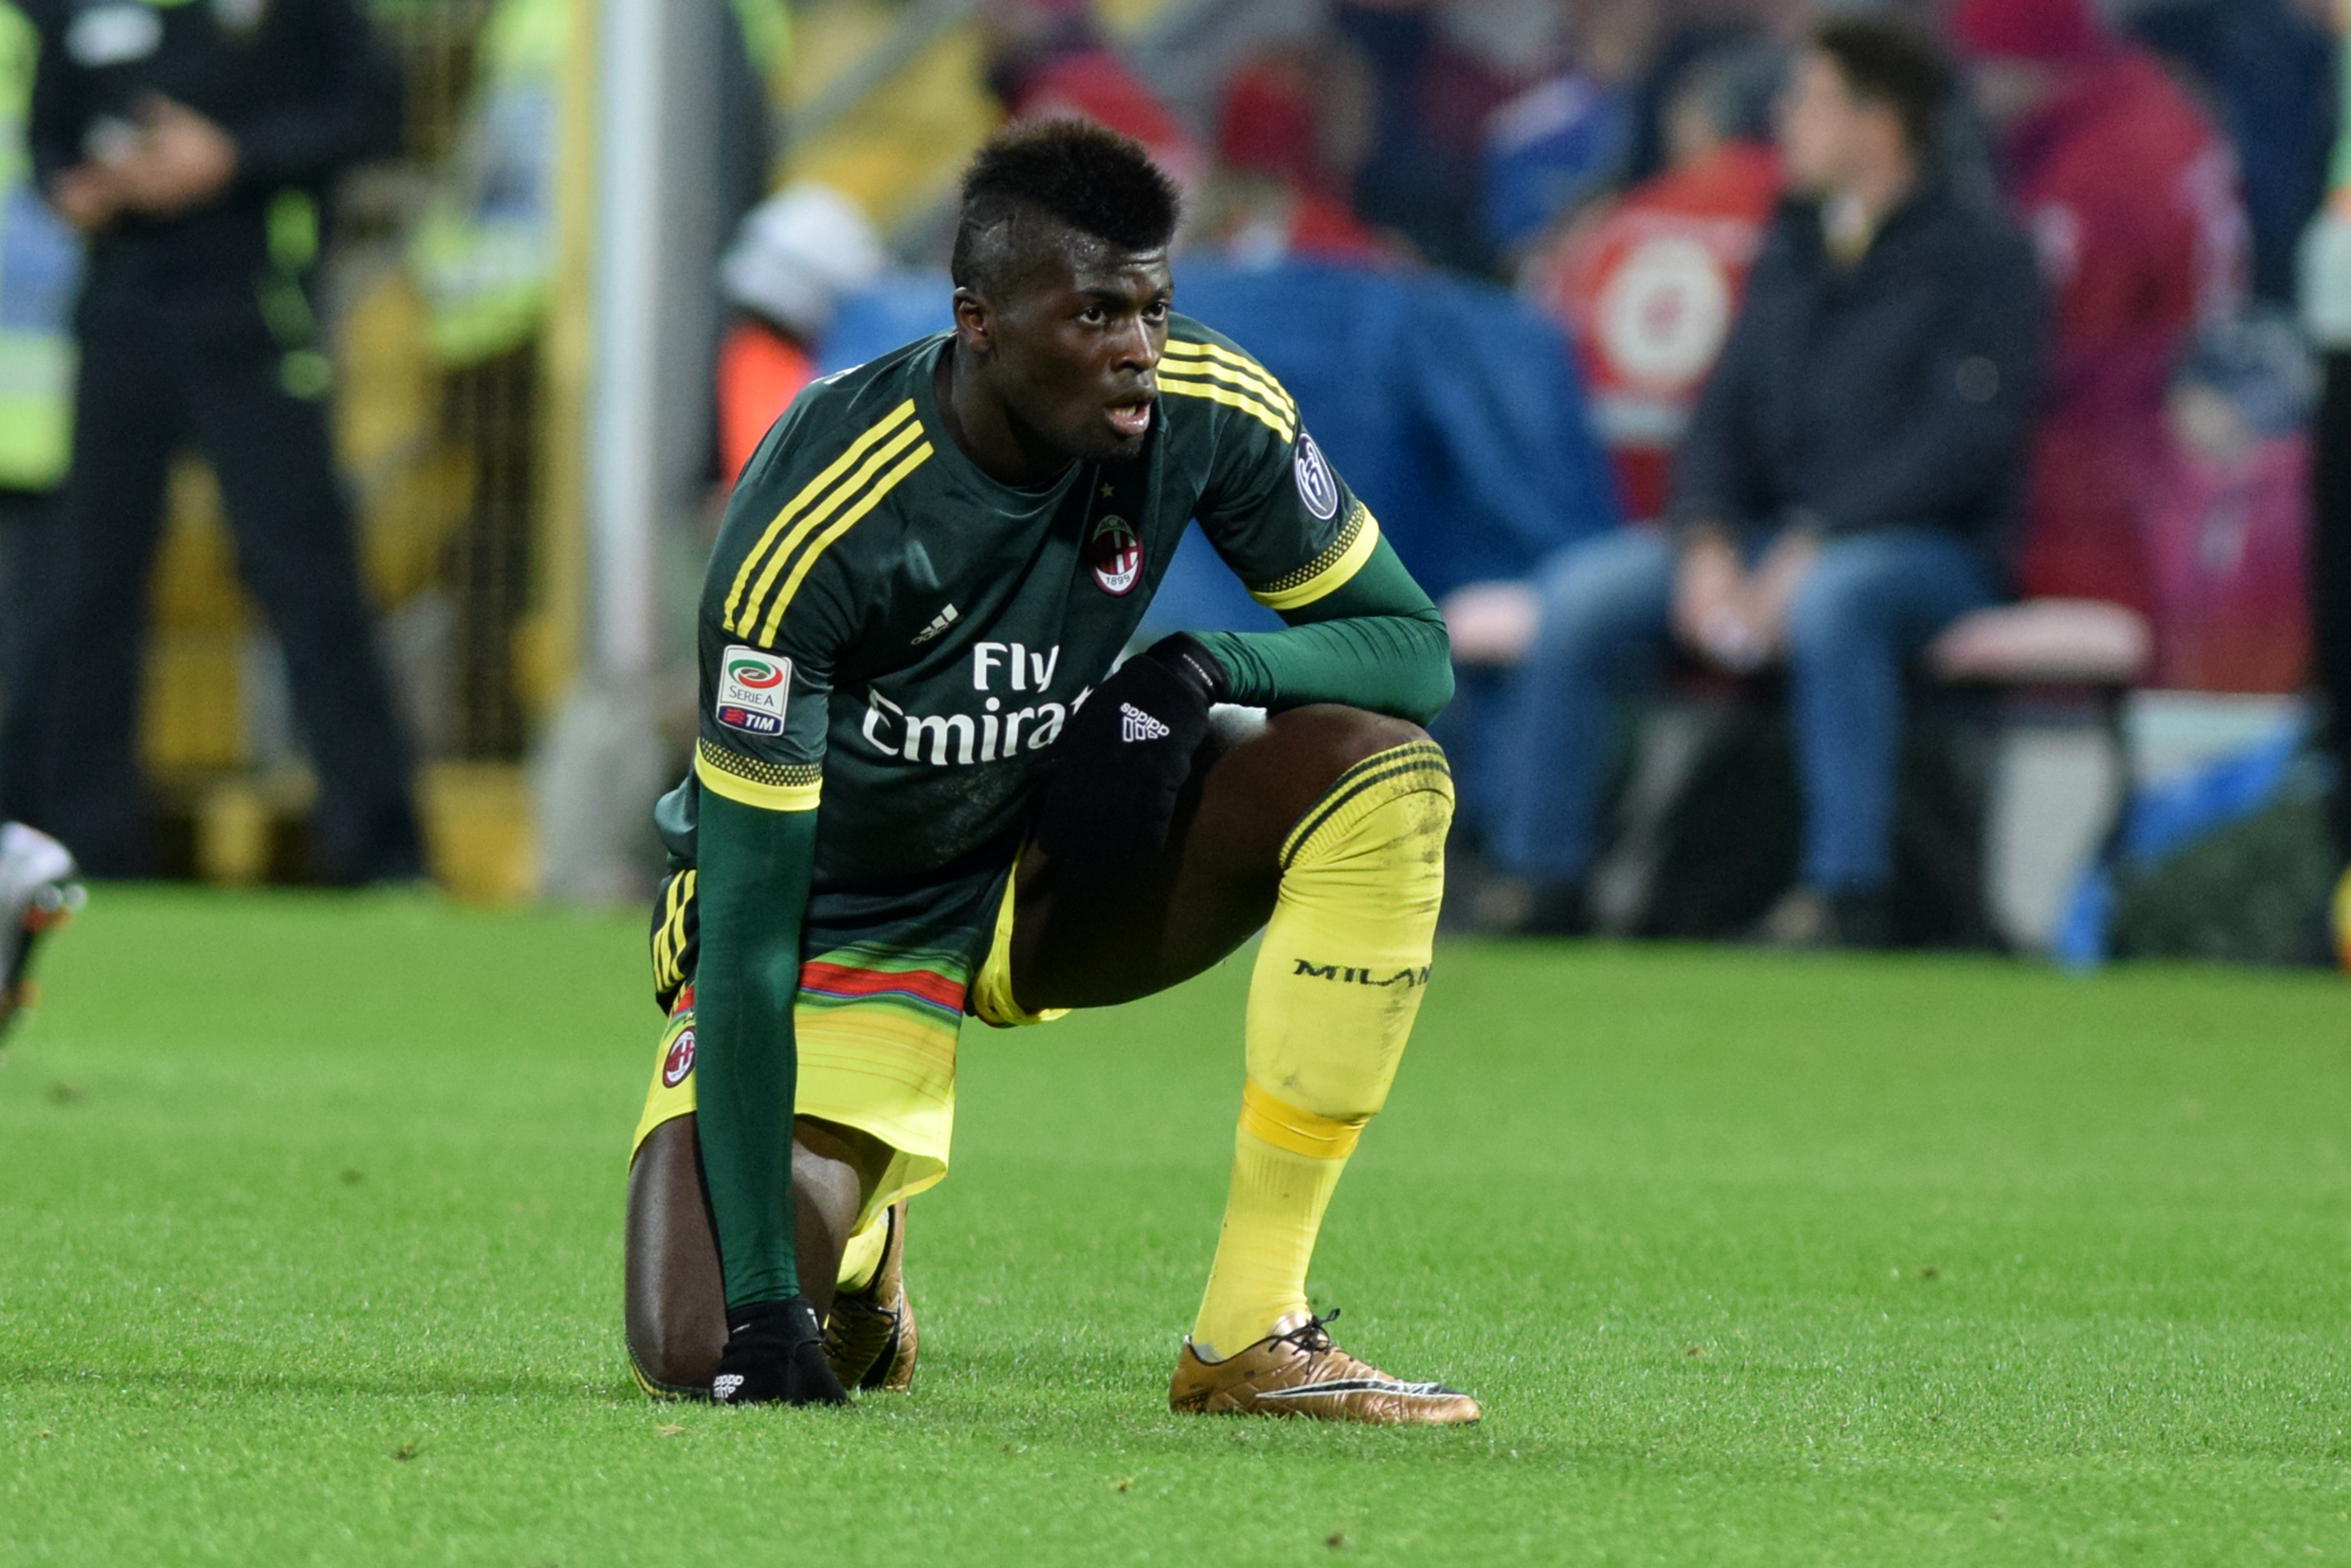 Liverpool Transfer News: M'Baye Niang Scouted Amid Tottenham Talk, Fresh Rumours | Bleacher Report | Latest News, Videos and Highlights